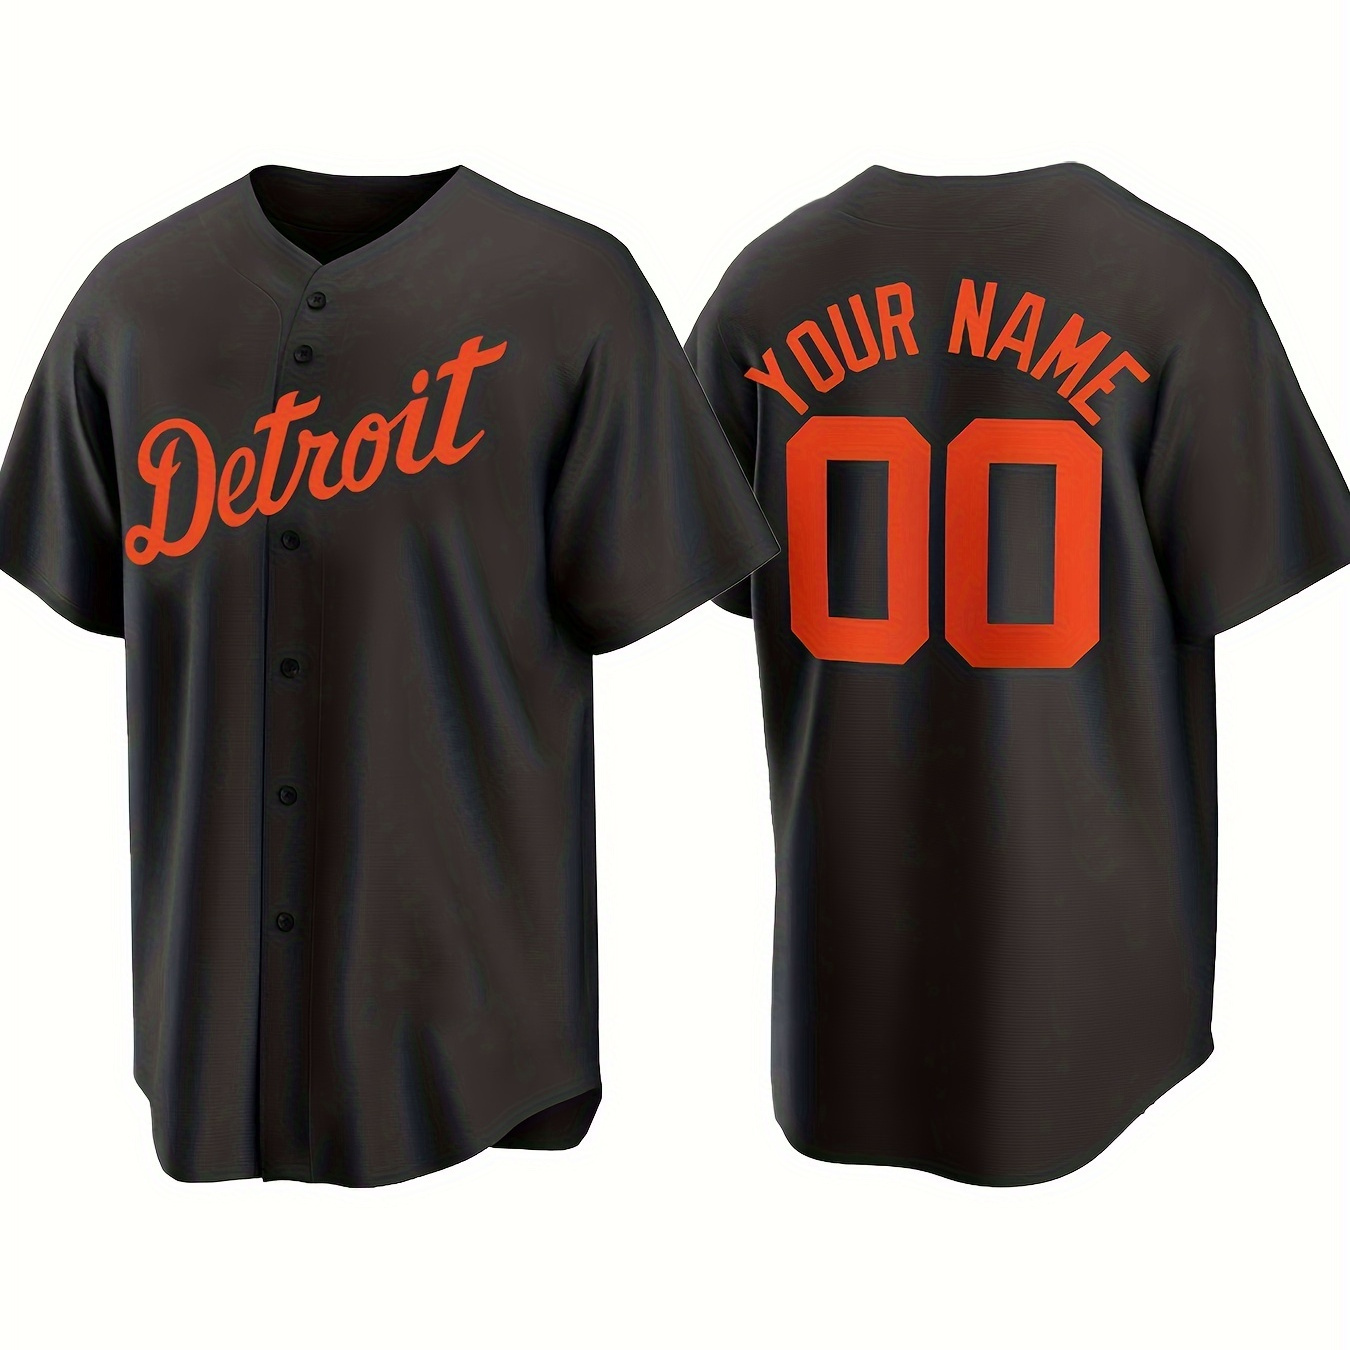 

Customized Name And Number Design, Men's Detroit Embroidery Design Short Sleeve Loose Breathable V-neck Baseball Jersey, Sports Shirt For Team Training